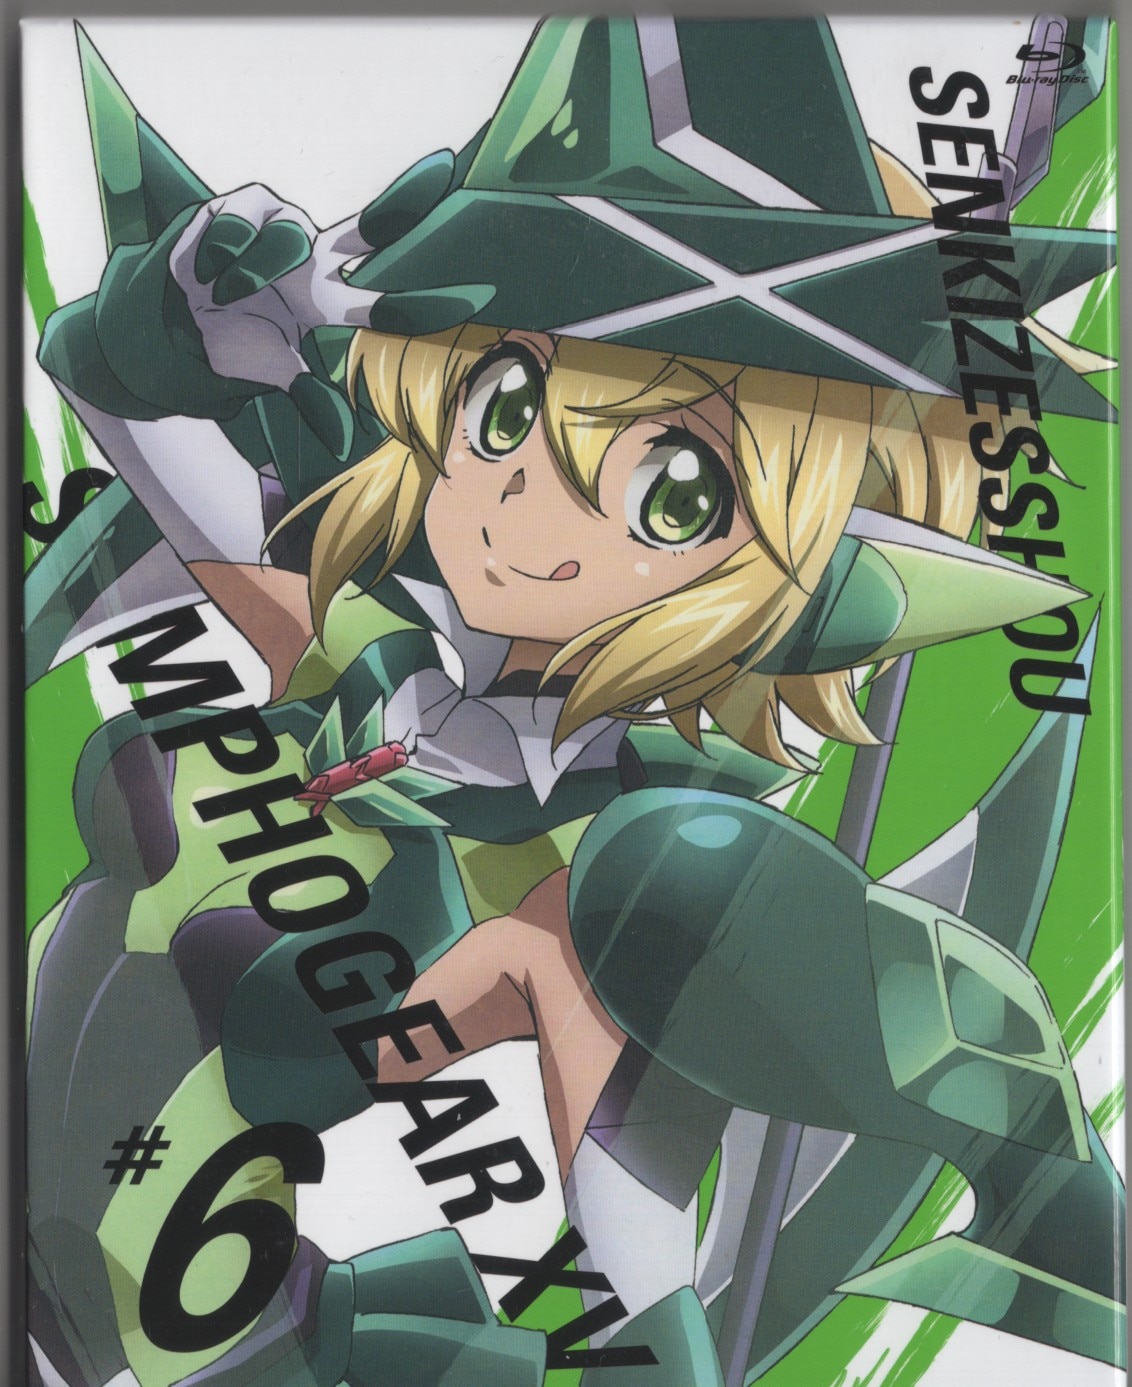 Symphogear Reviews and Other - What is Symphogear, and what am I going to  review? - Wattpad